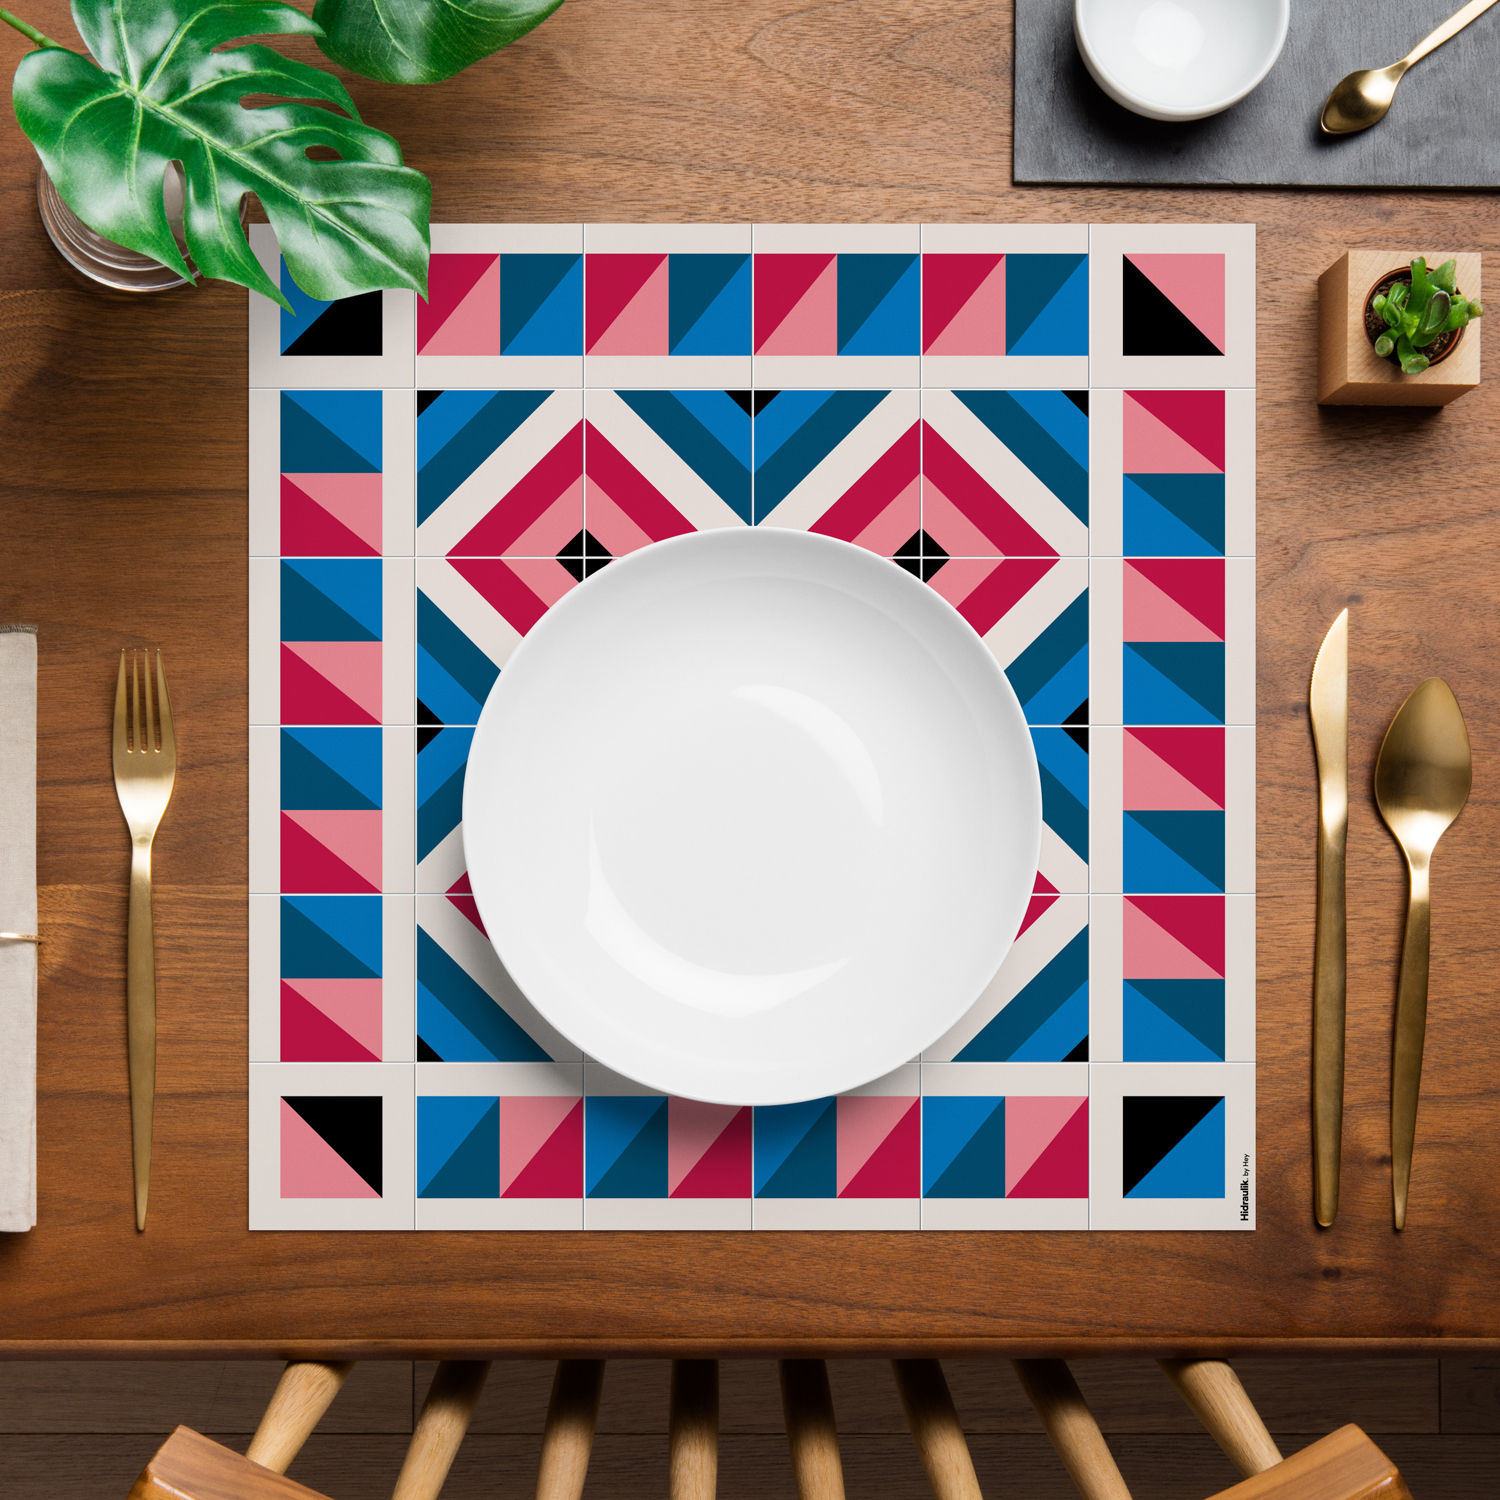 Prints by Hey for Hidraulik, a range of 100% PVC floor and table mats inspired by 20th century modernism